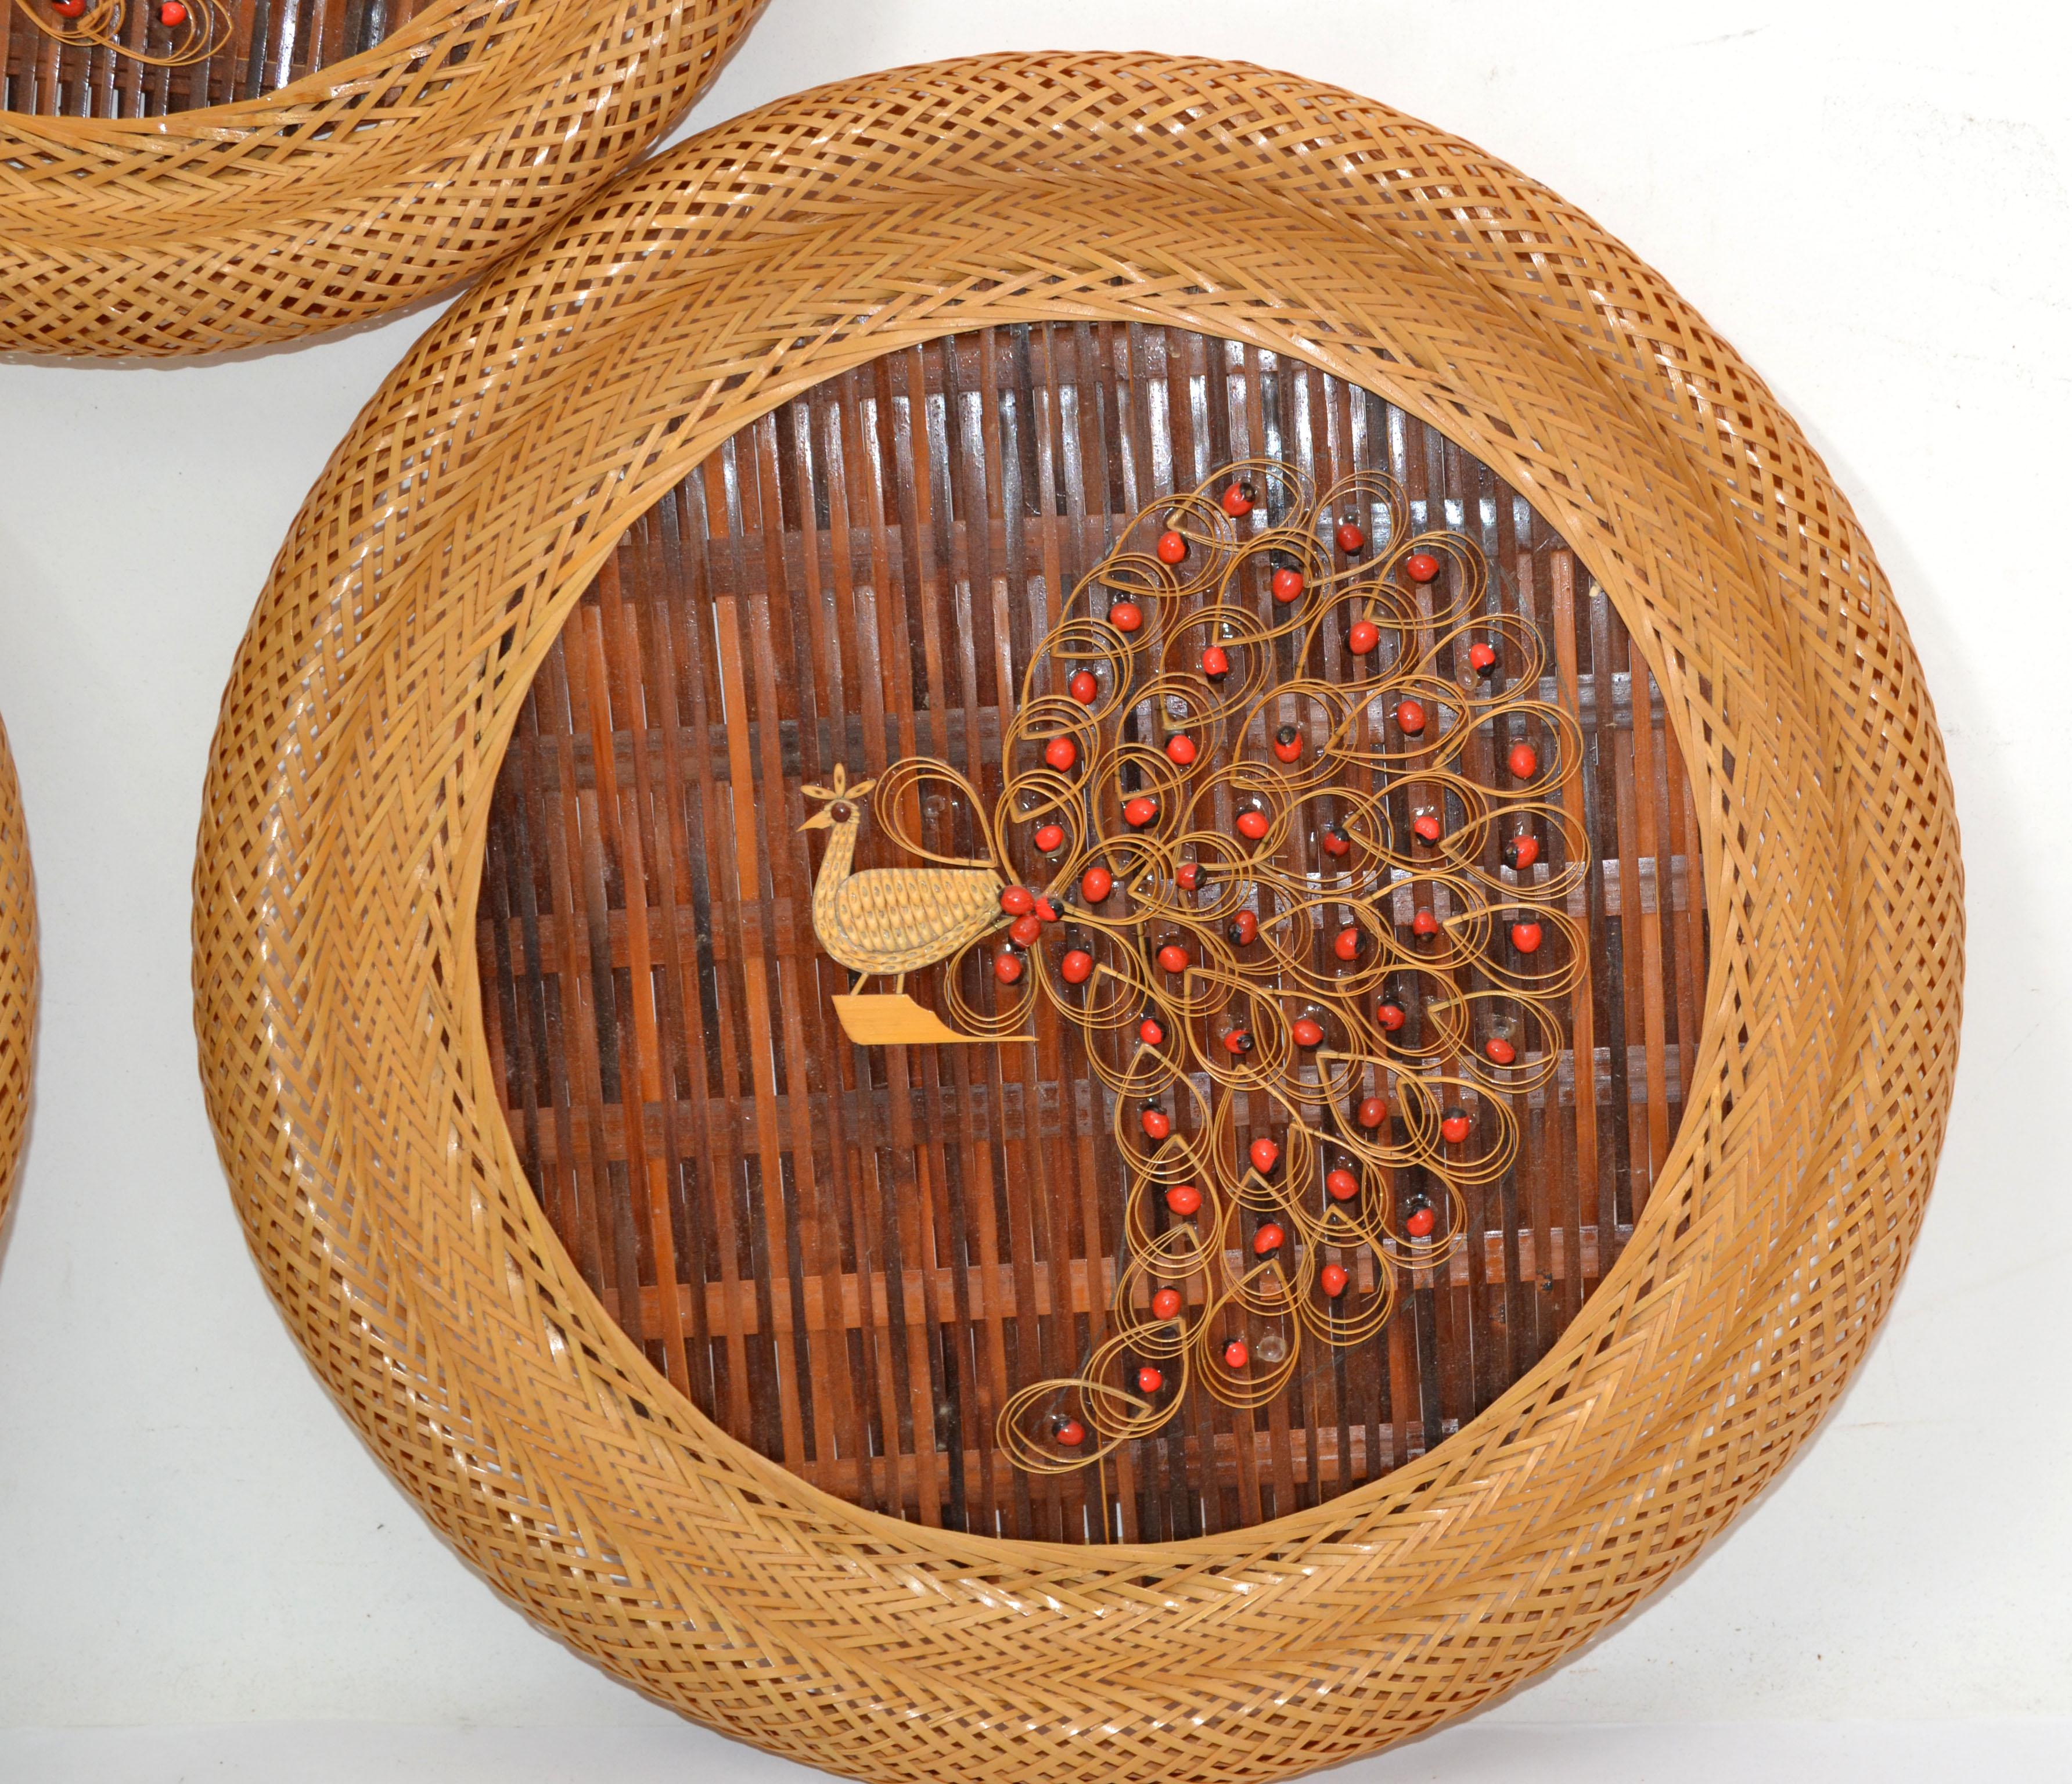 3 Nesting Decorative Handcrafted Cane & Rattan Beaded Wall Plates Peacock Motif For Sale 1